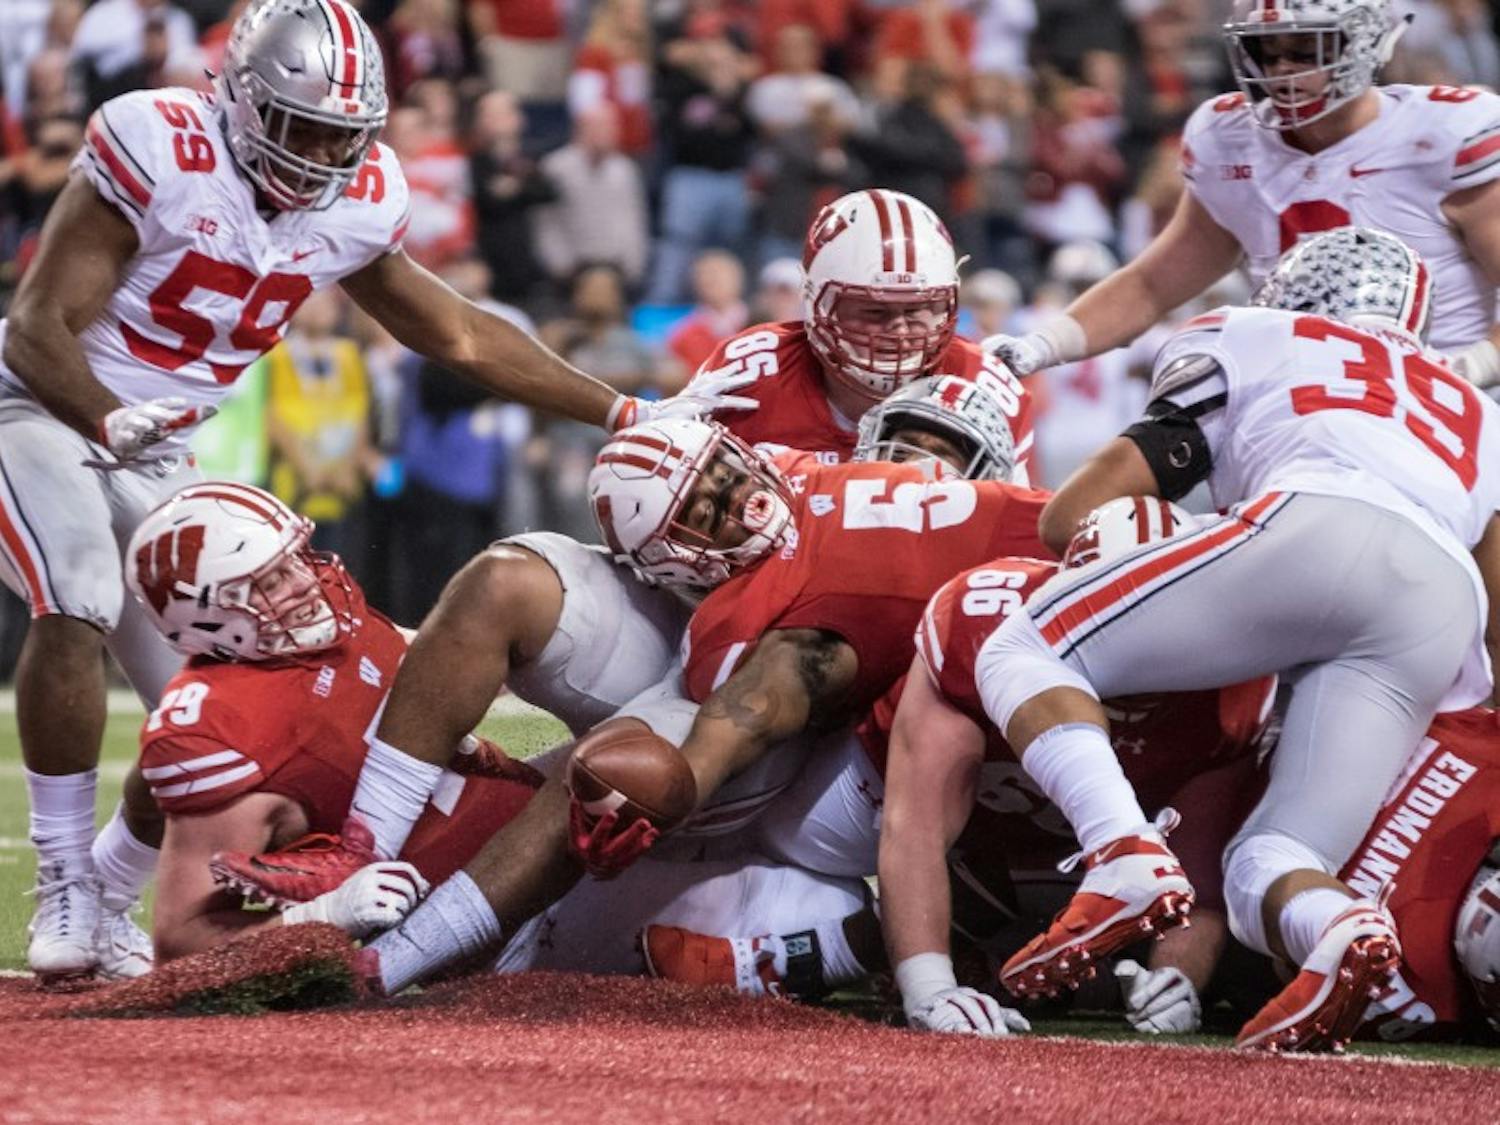 The last time Wisconsin made it to the Big Ten Championship game, they were crushed by Ohio State, but they hope it will be different this time around.